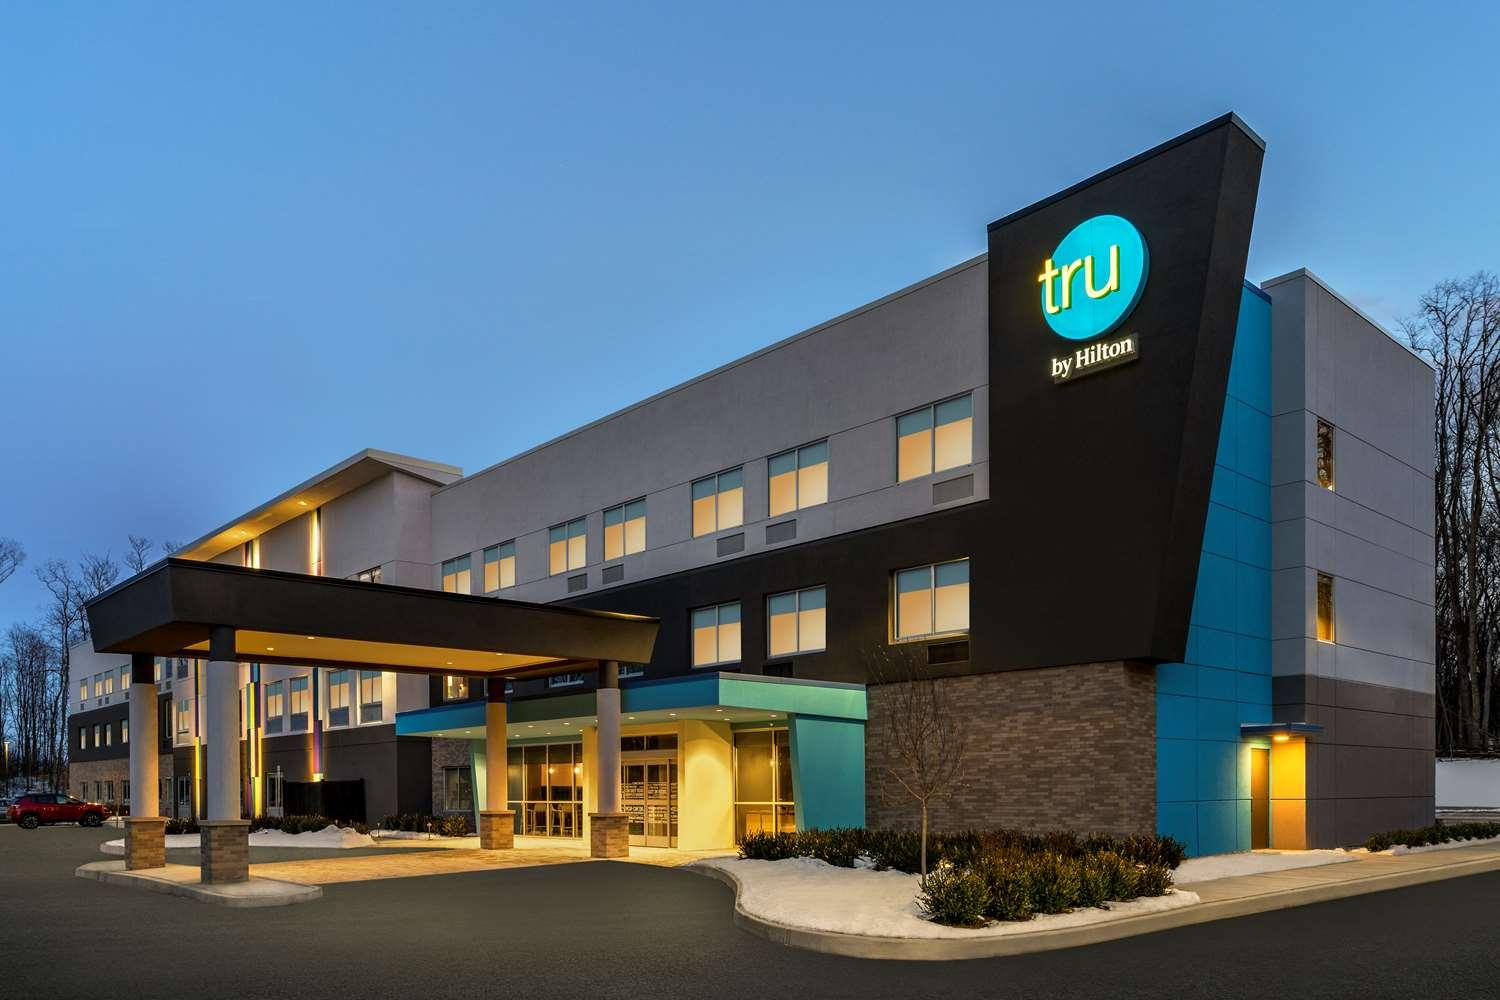 Tru by Hilton Albany Airport in Albany, NY